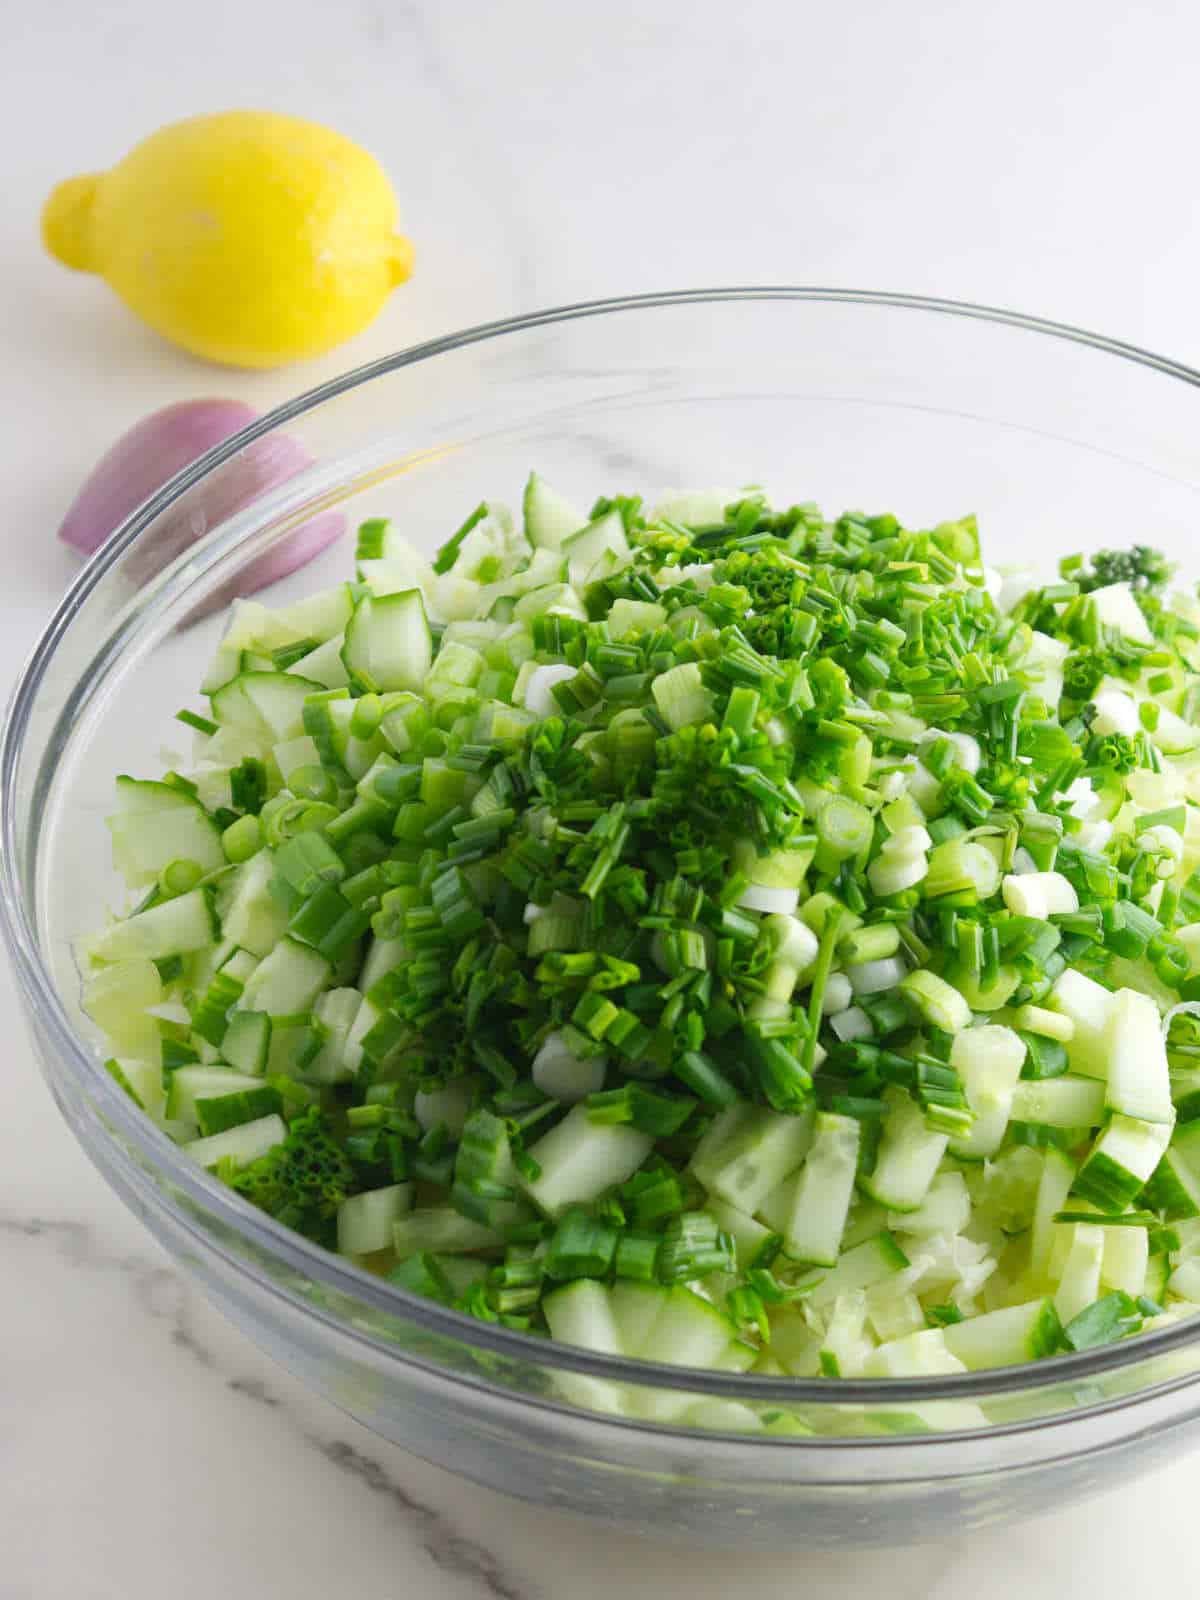 chopped green onions and chives on top of chopped cabbage.